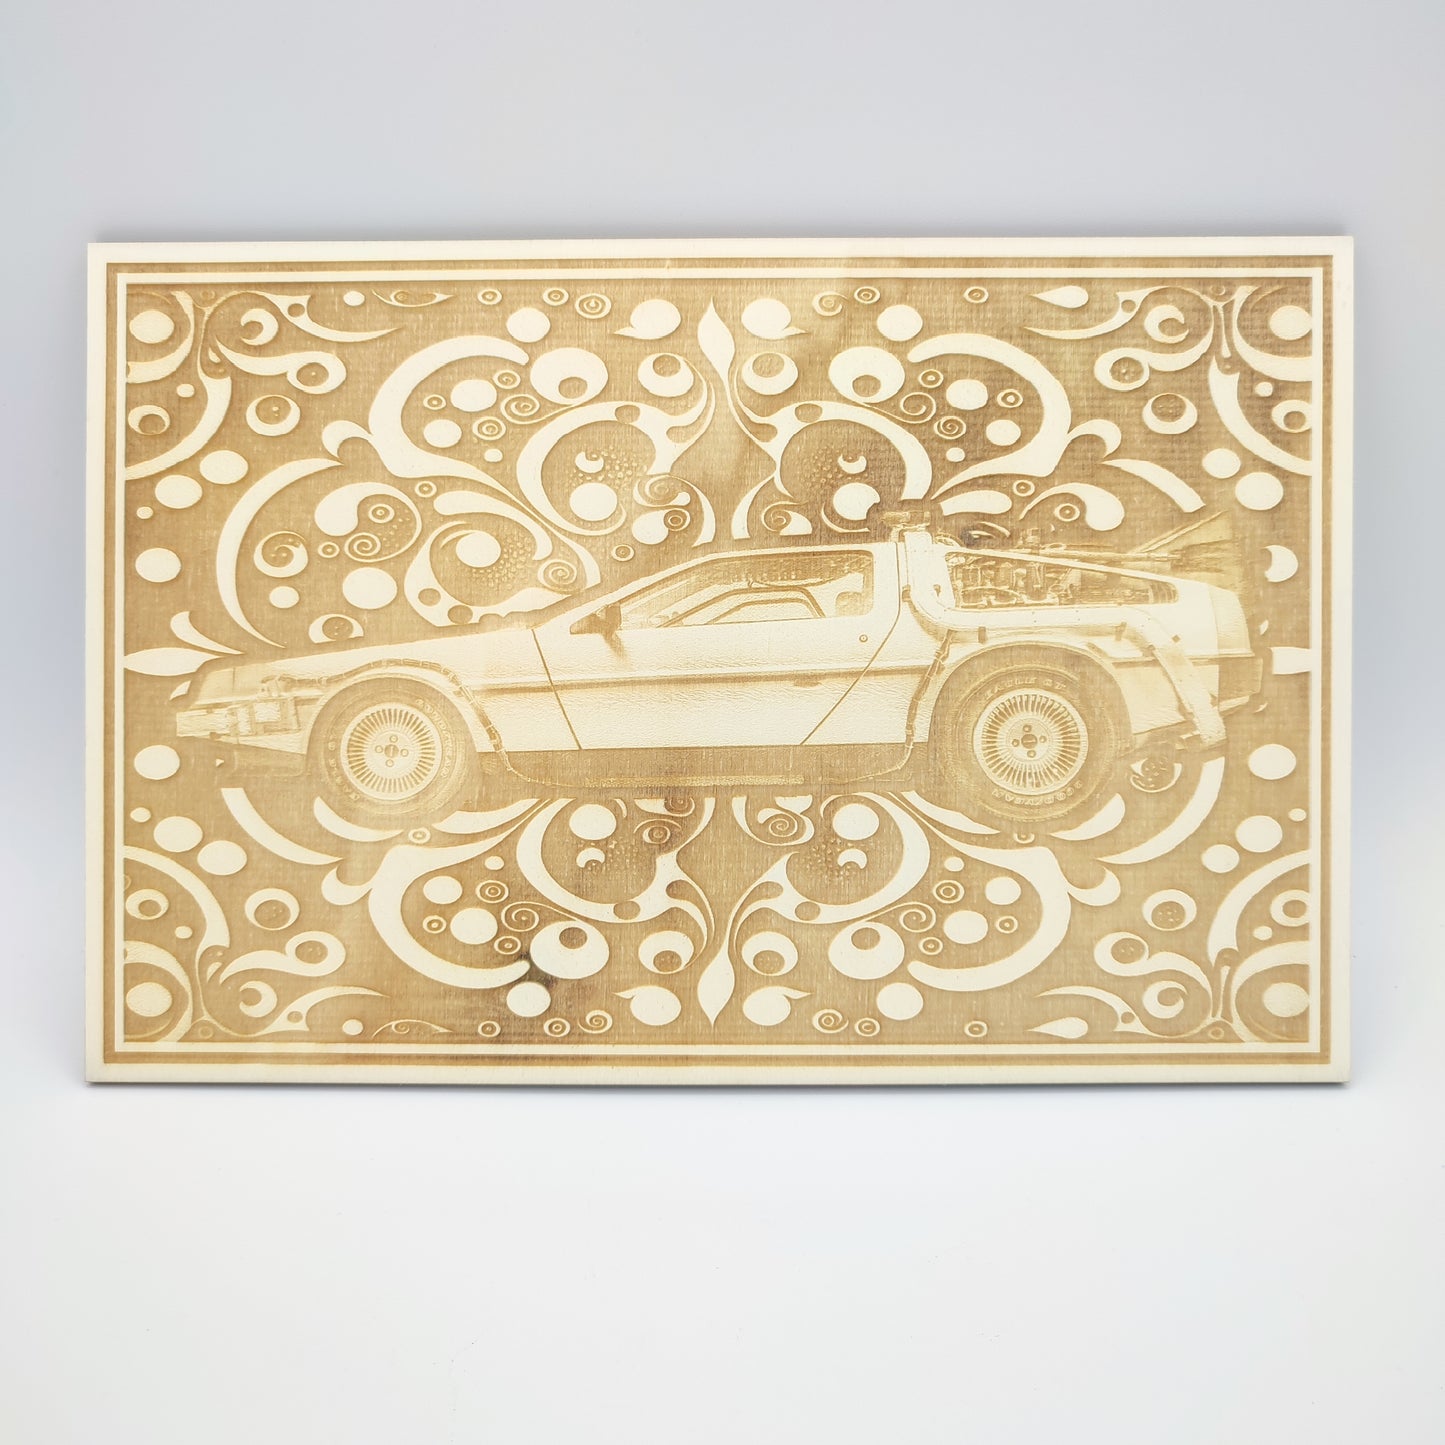 Delorean - Back to the Future - Wood Engraving